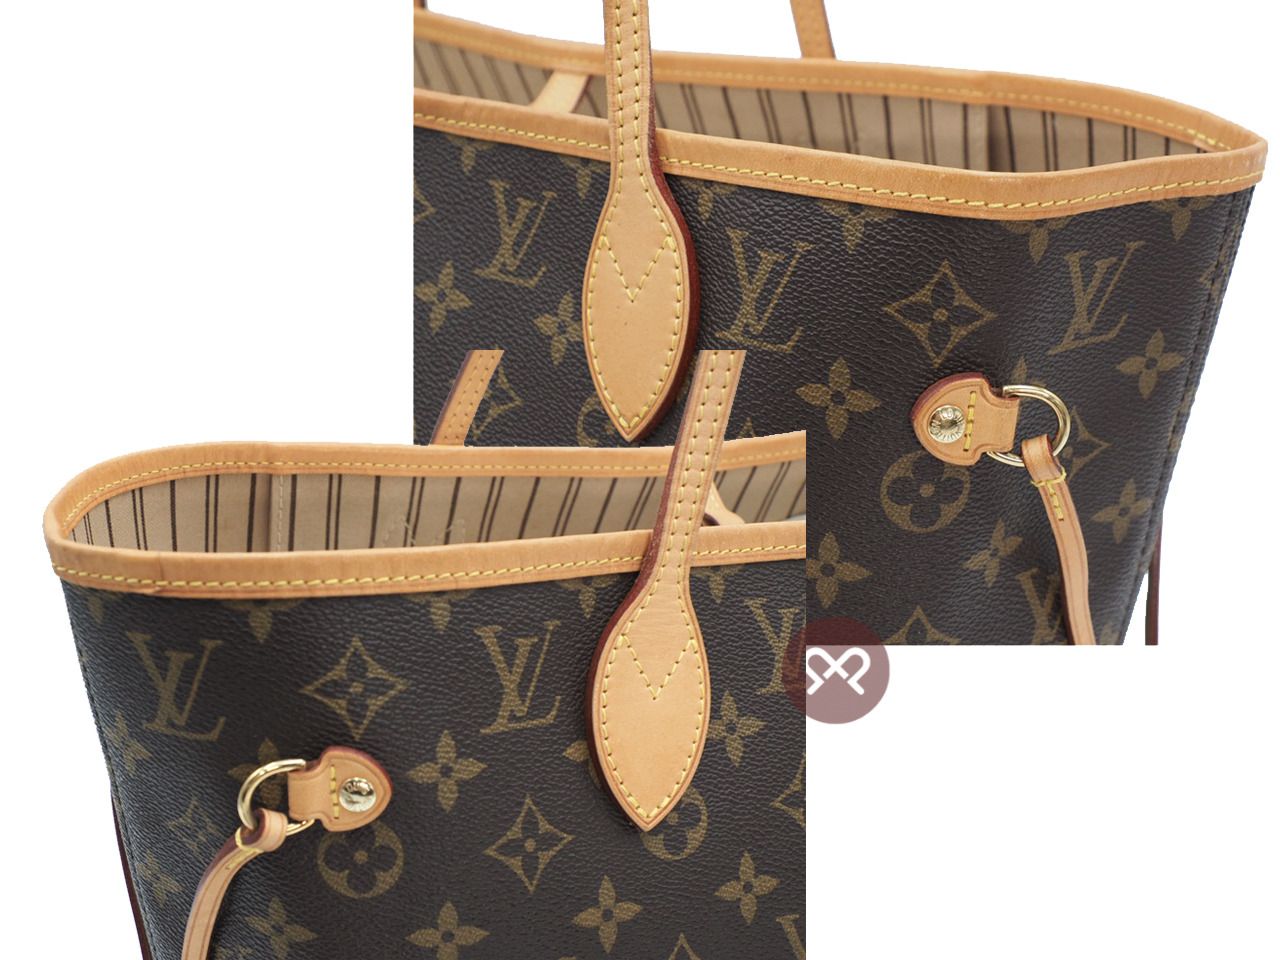 Louis Vuitton Monogram M40995 Neverfull MM Shopping Bag with Pouch